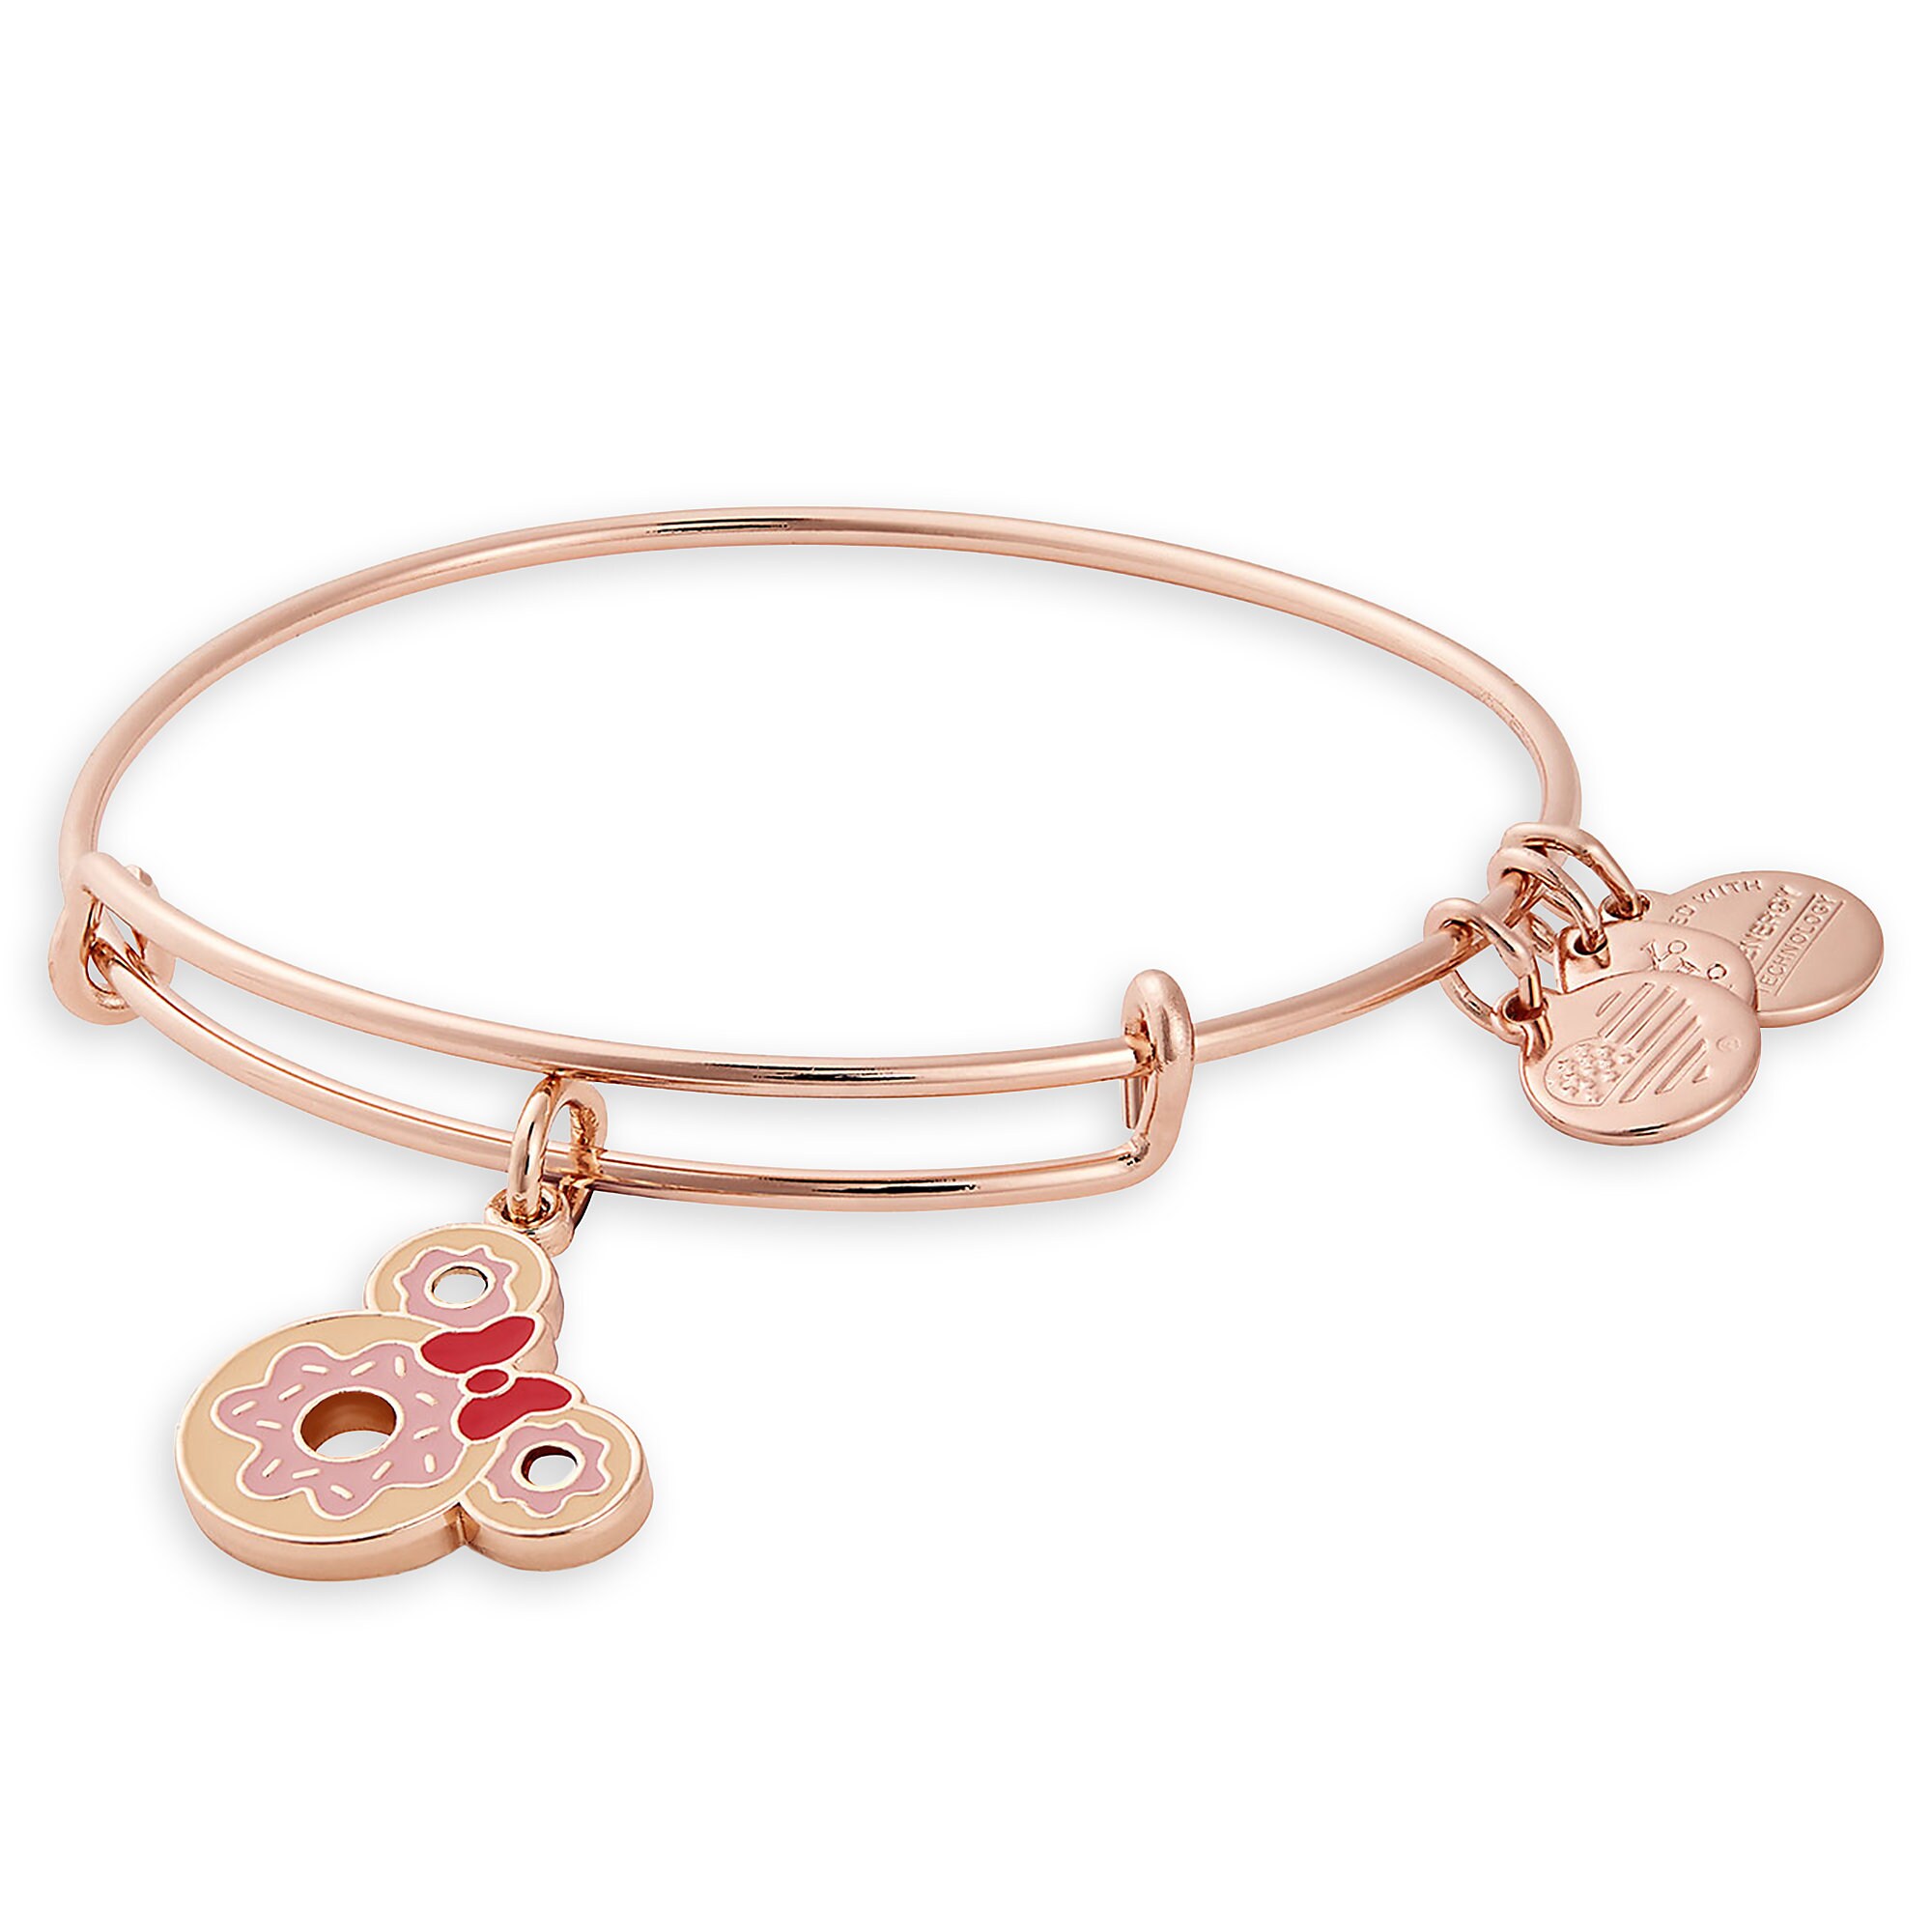 Minnie Mouse Donut Bangle by Alex and Ani